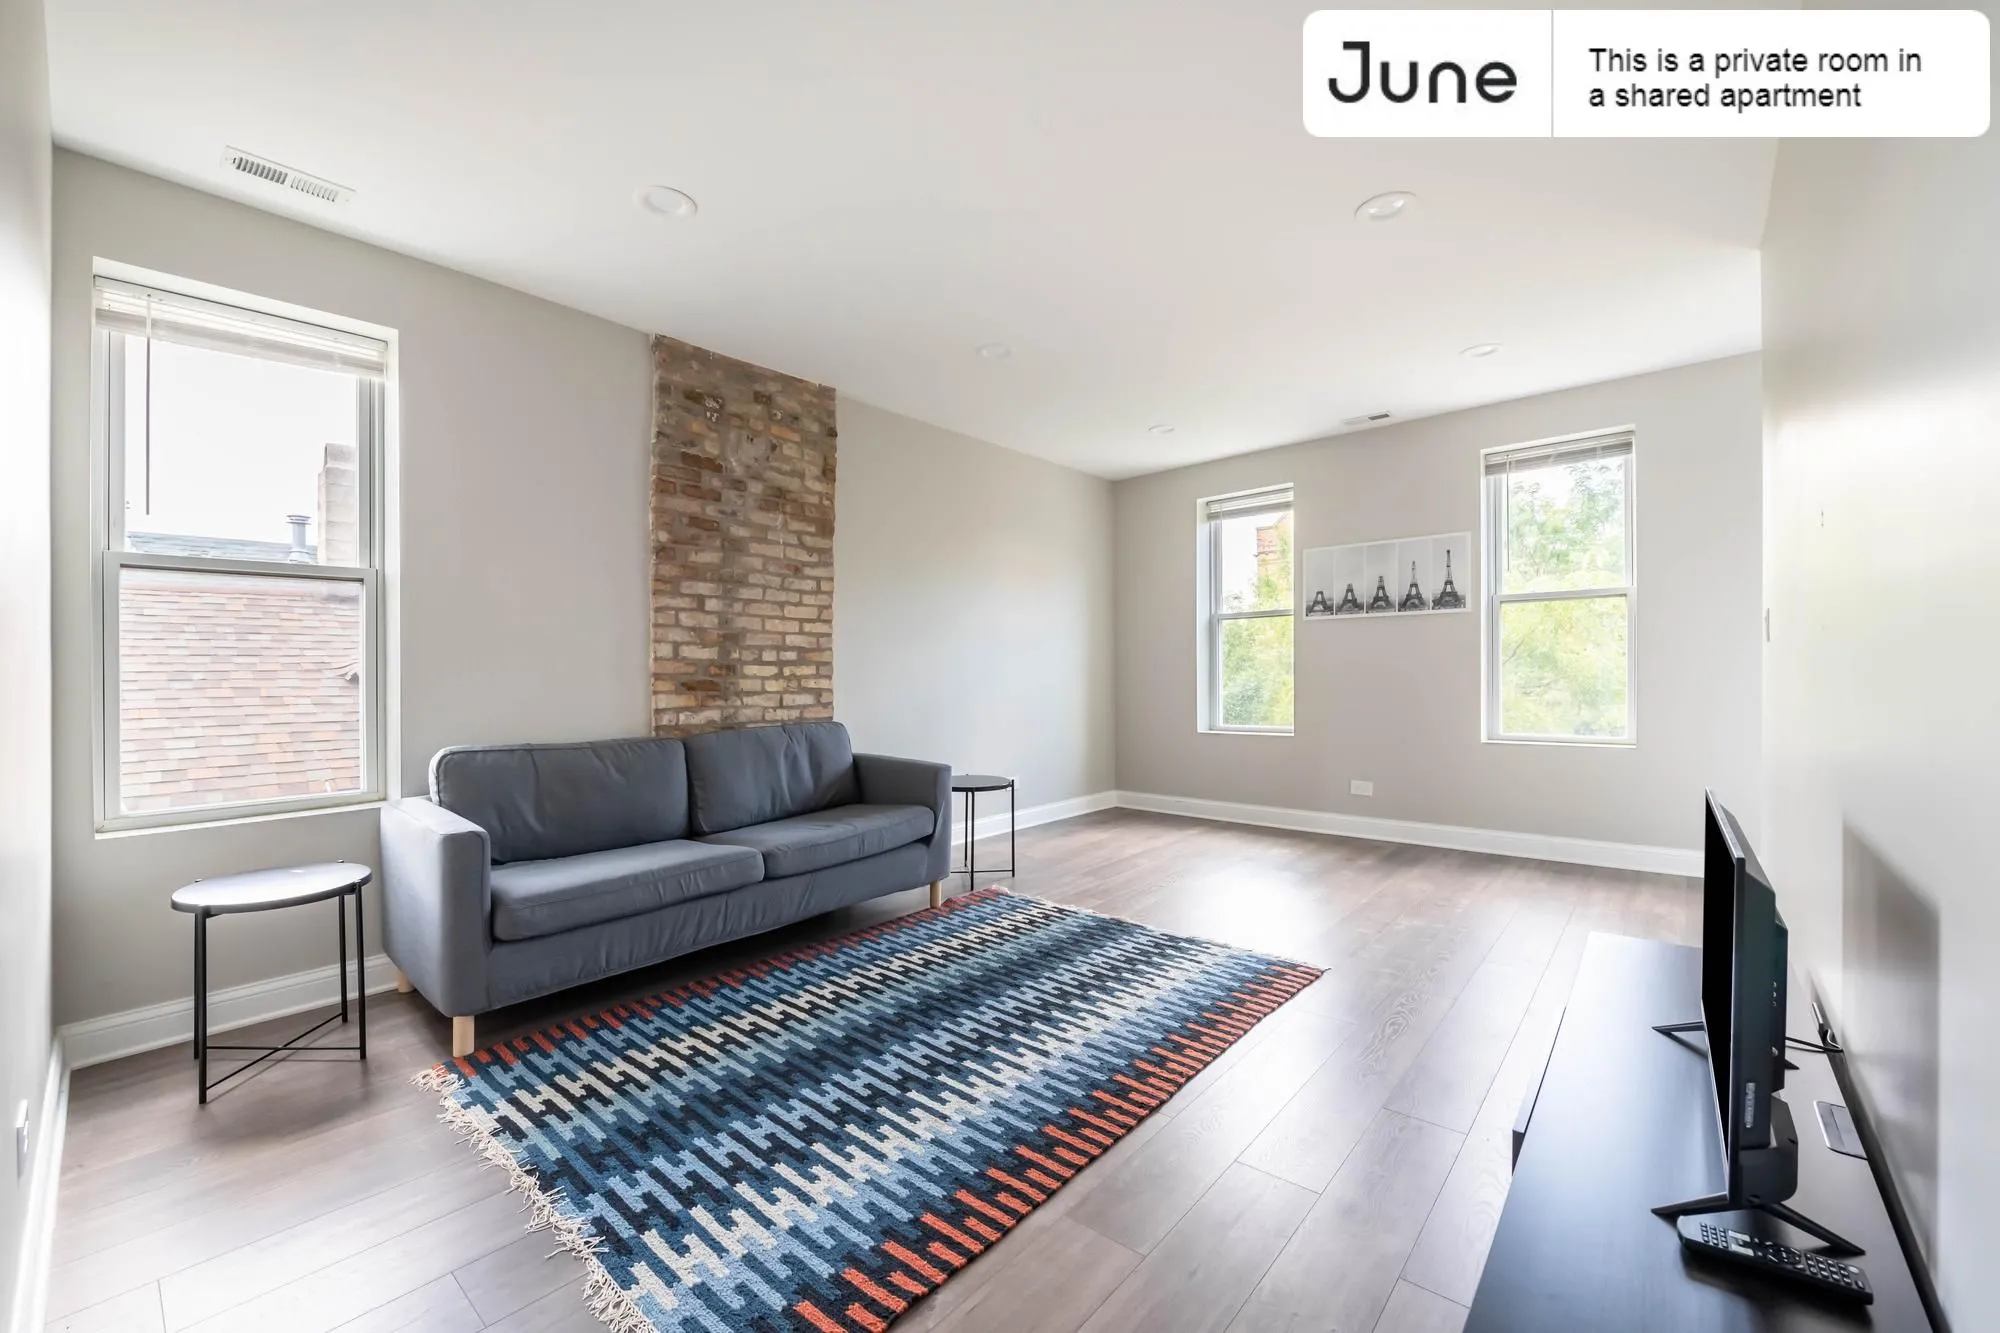 1321 W CULLERTON ST 60608-Room For Rent-unit#002-Chicago-IL